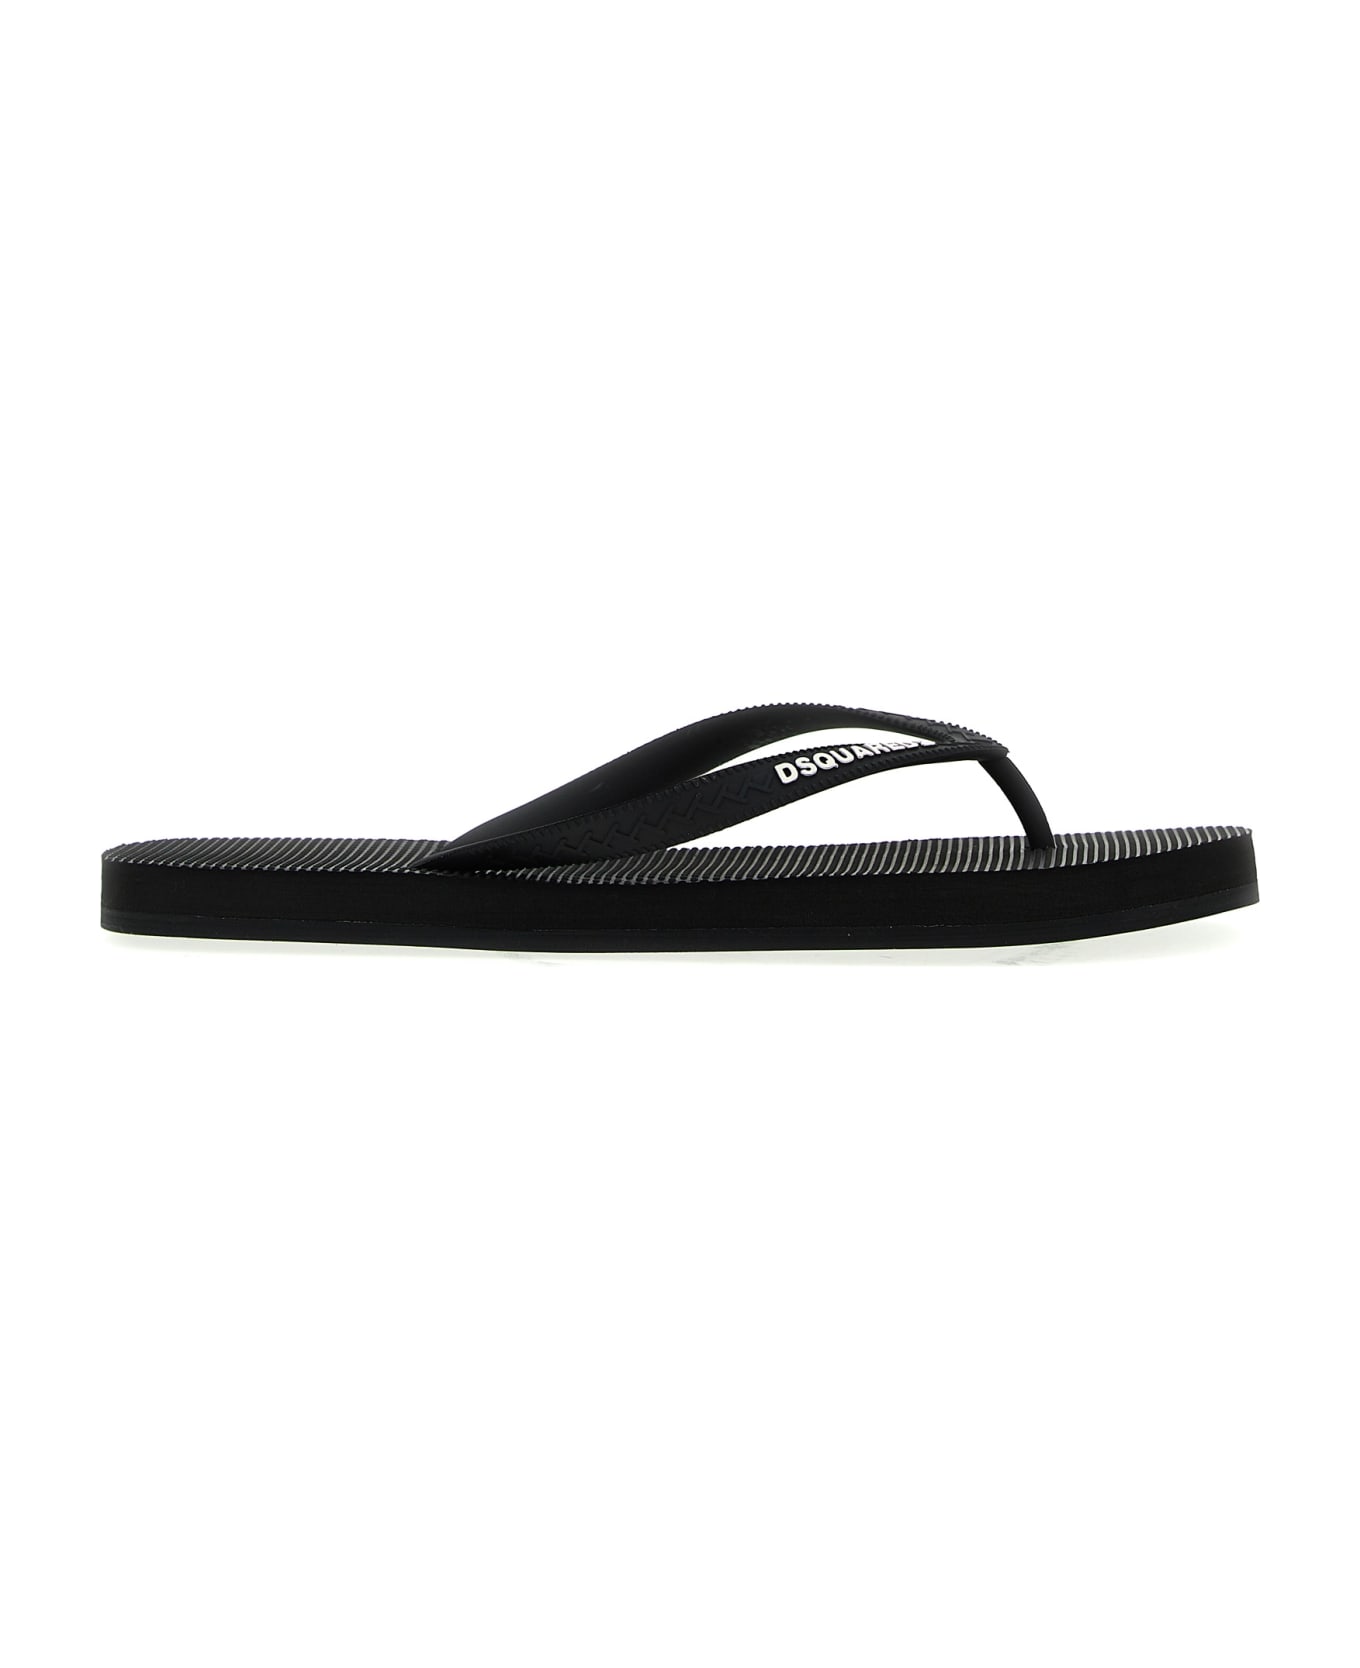 Dsquared2 Logo Thong Sandals - Black その他各種シューズ